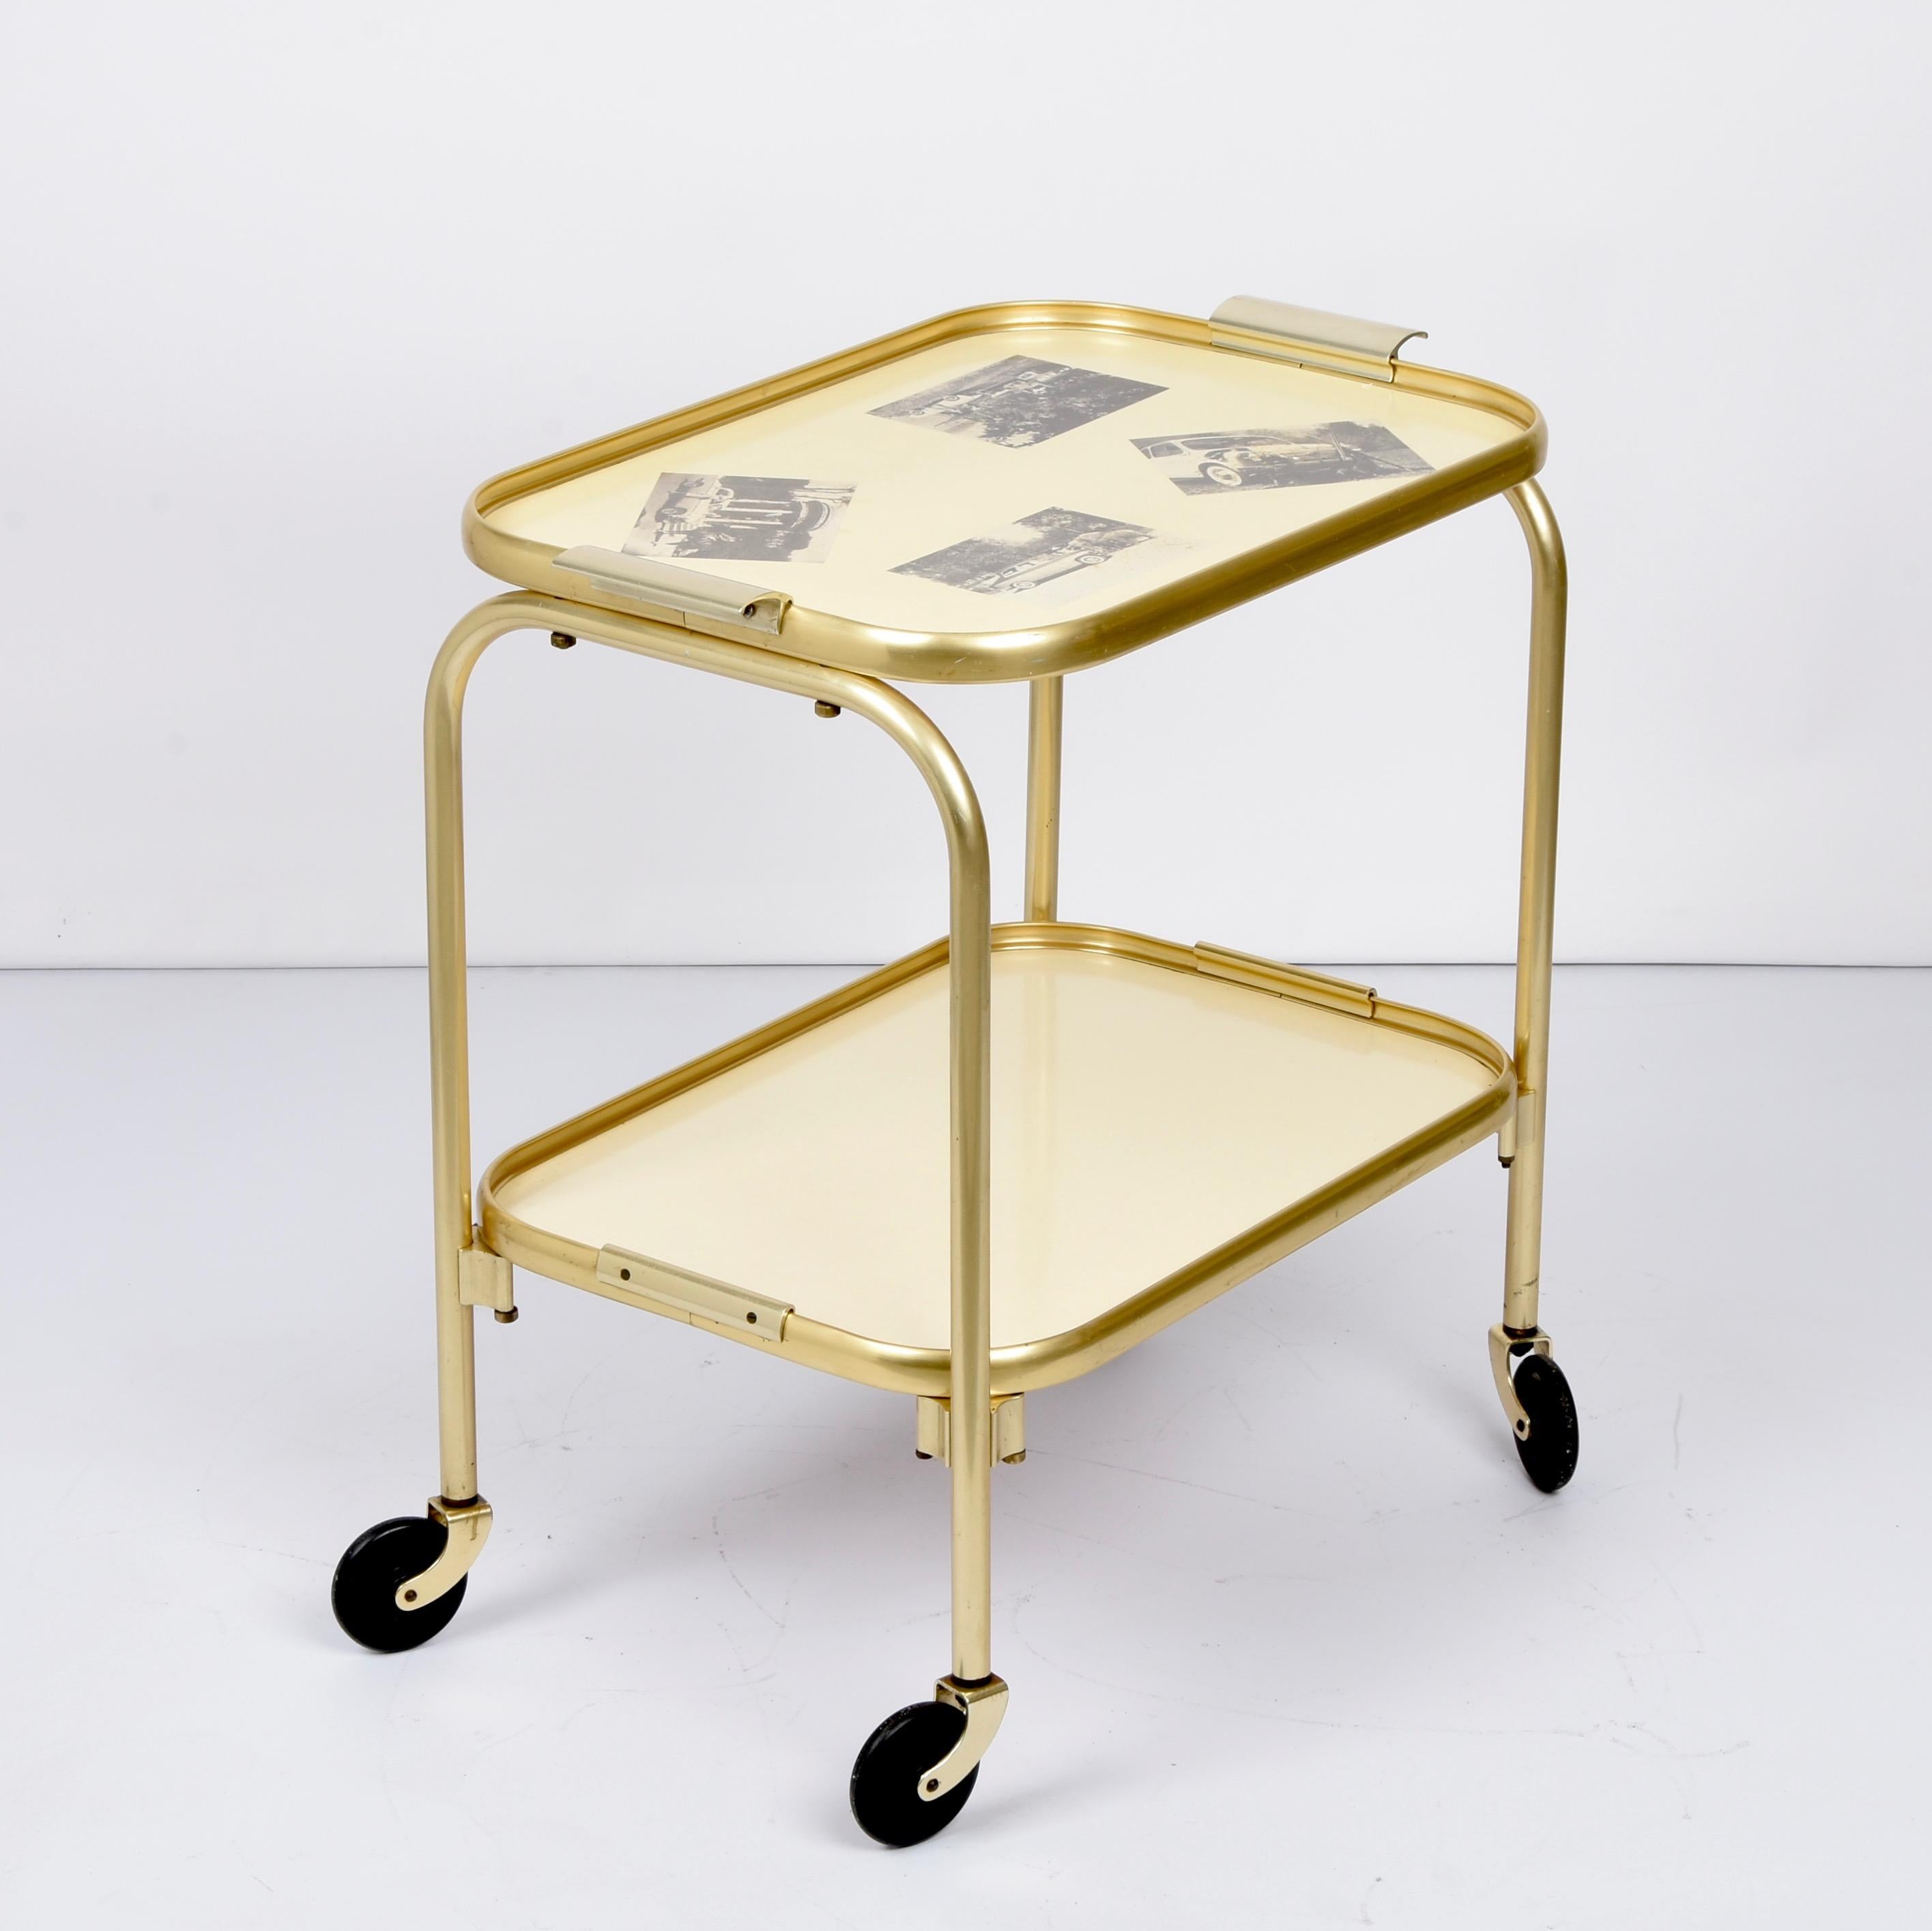 Unique mid-century golden aluminium and formica vintage cart. This fantastic item was produced in Italy during the 1950s.

A gorgeous piece with anodized golden aluminium and the shelves in golden yellow Formica. The top is very original as it is